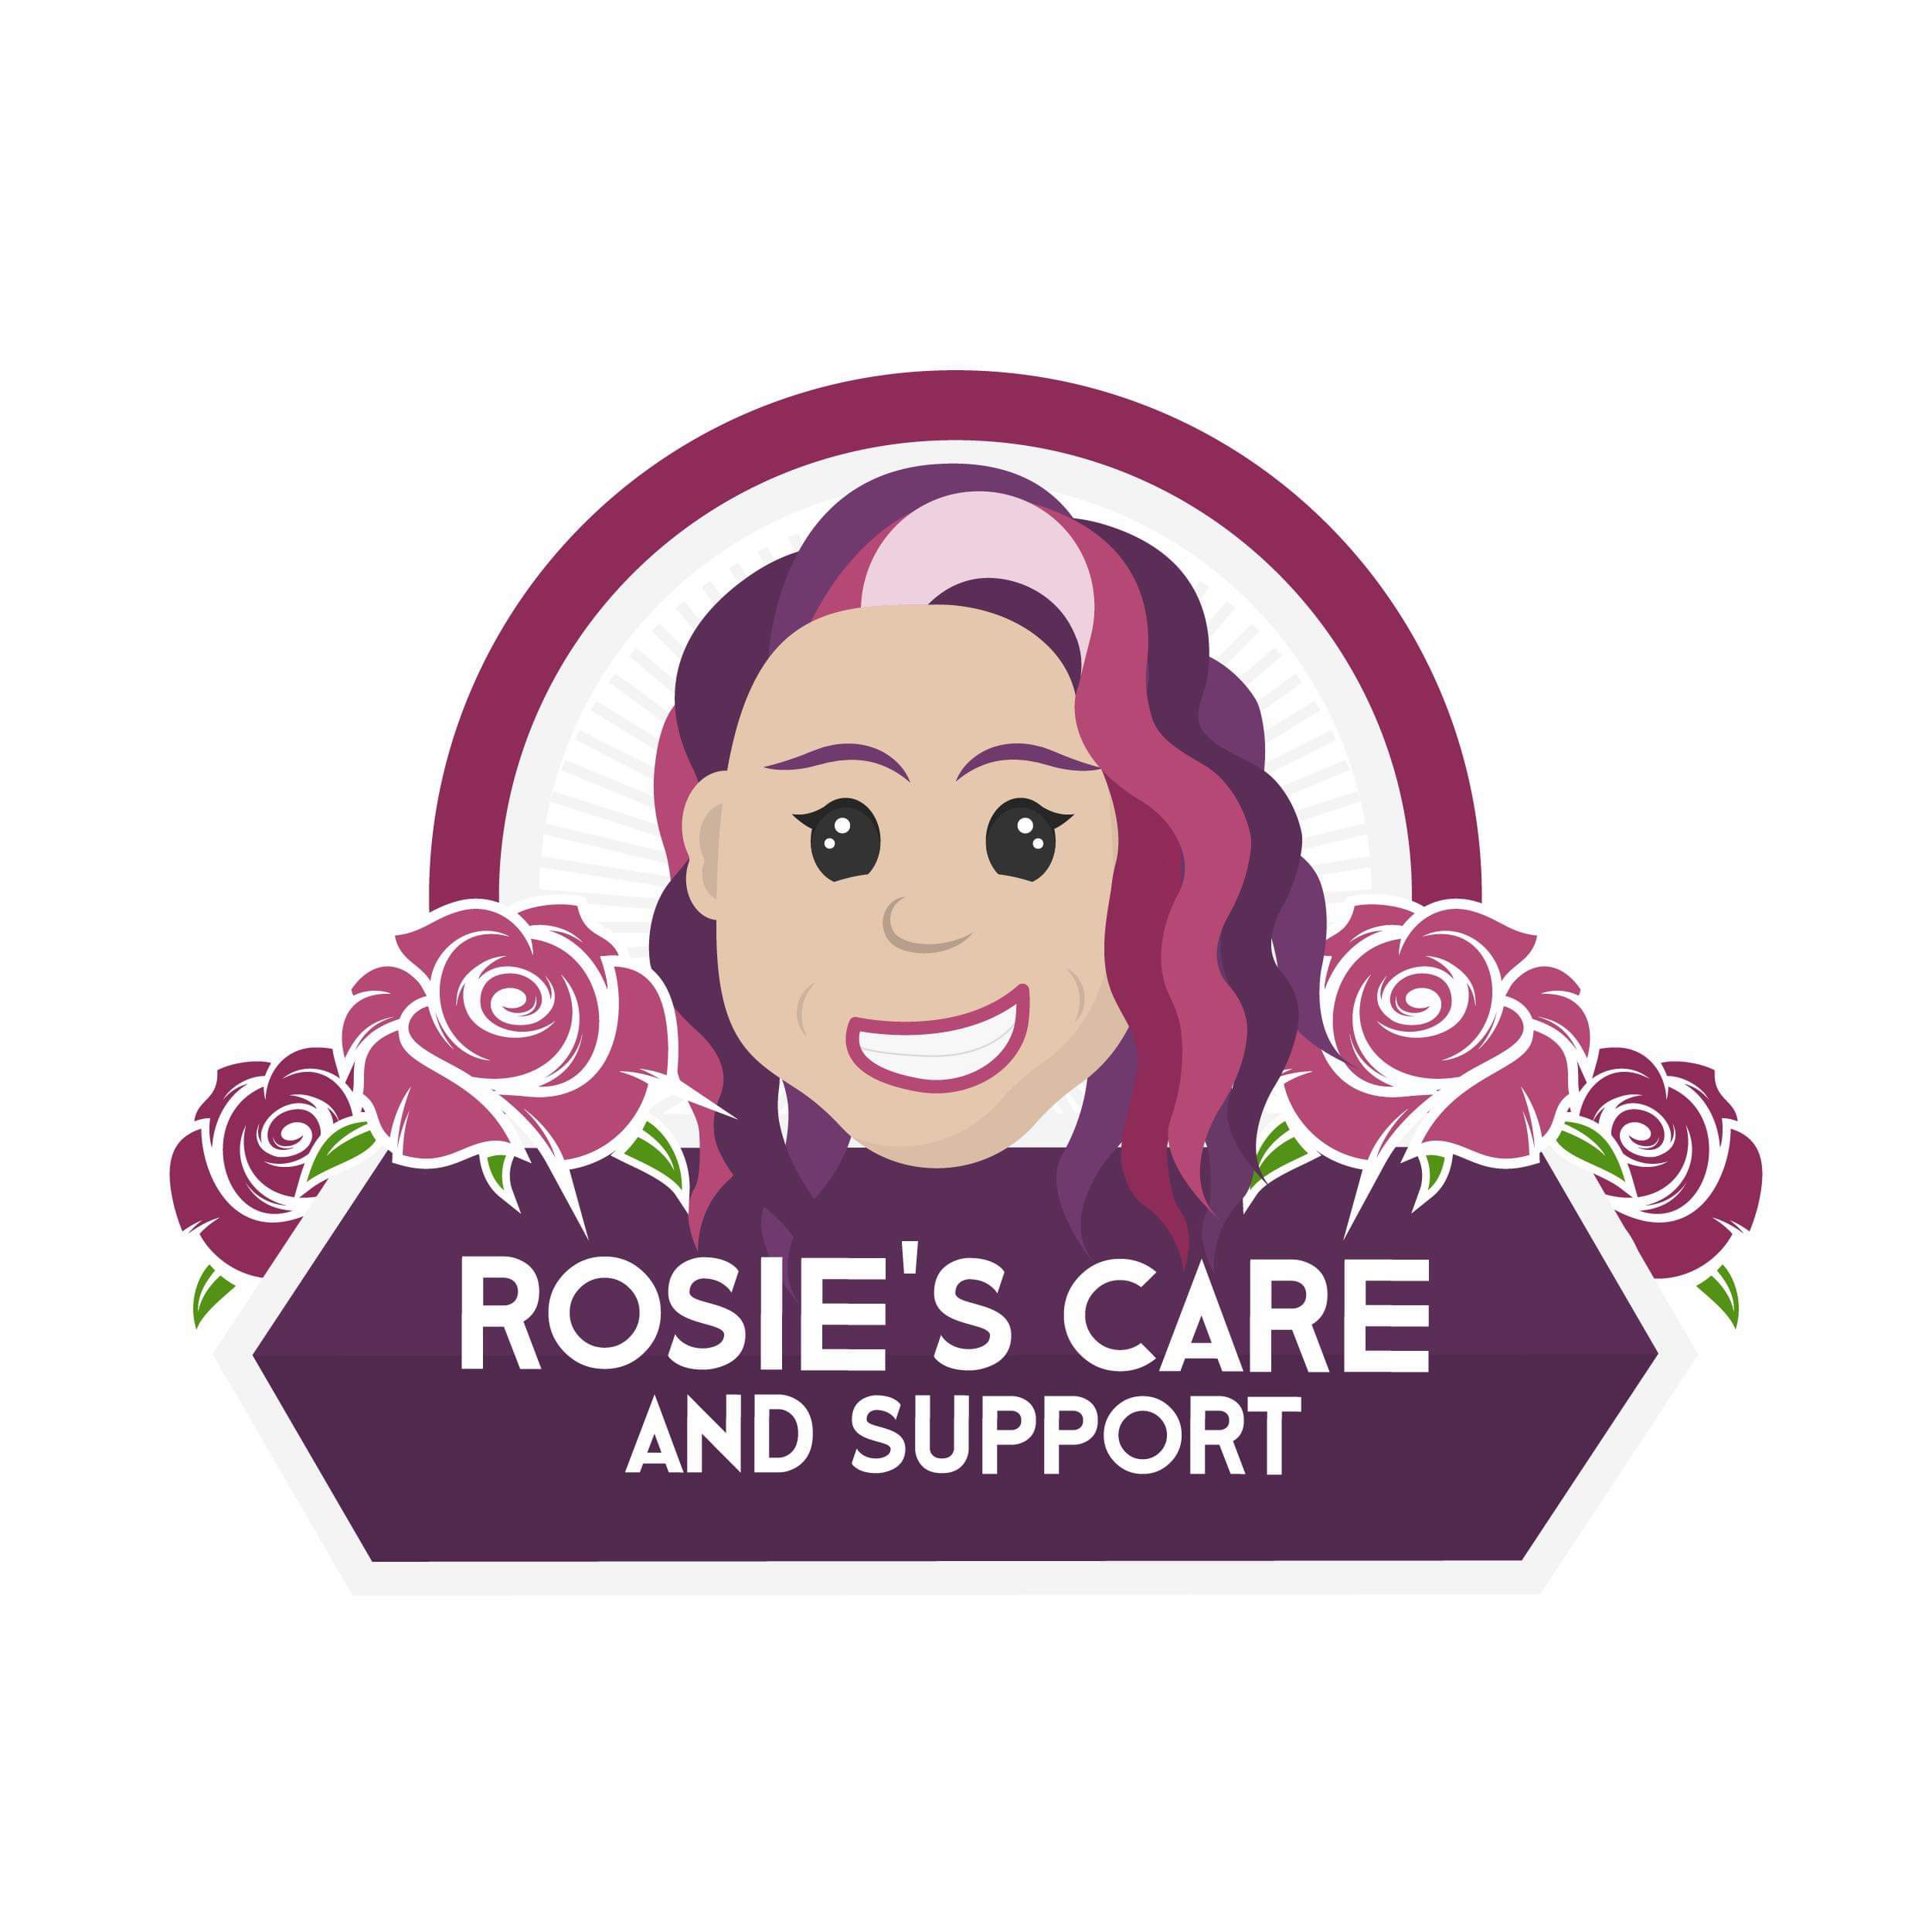 Rosie's Care and Support logo. A smiling lady with roses around her and the name of the business 'Rosie's Care and Support'